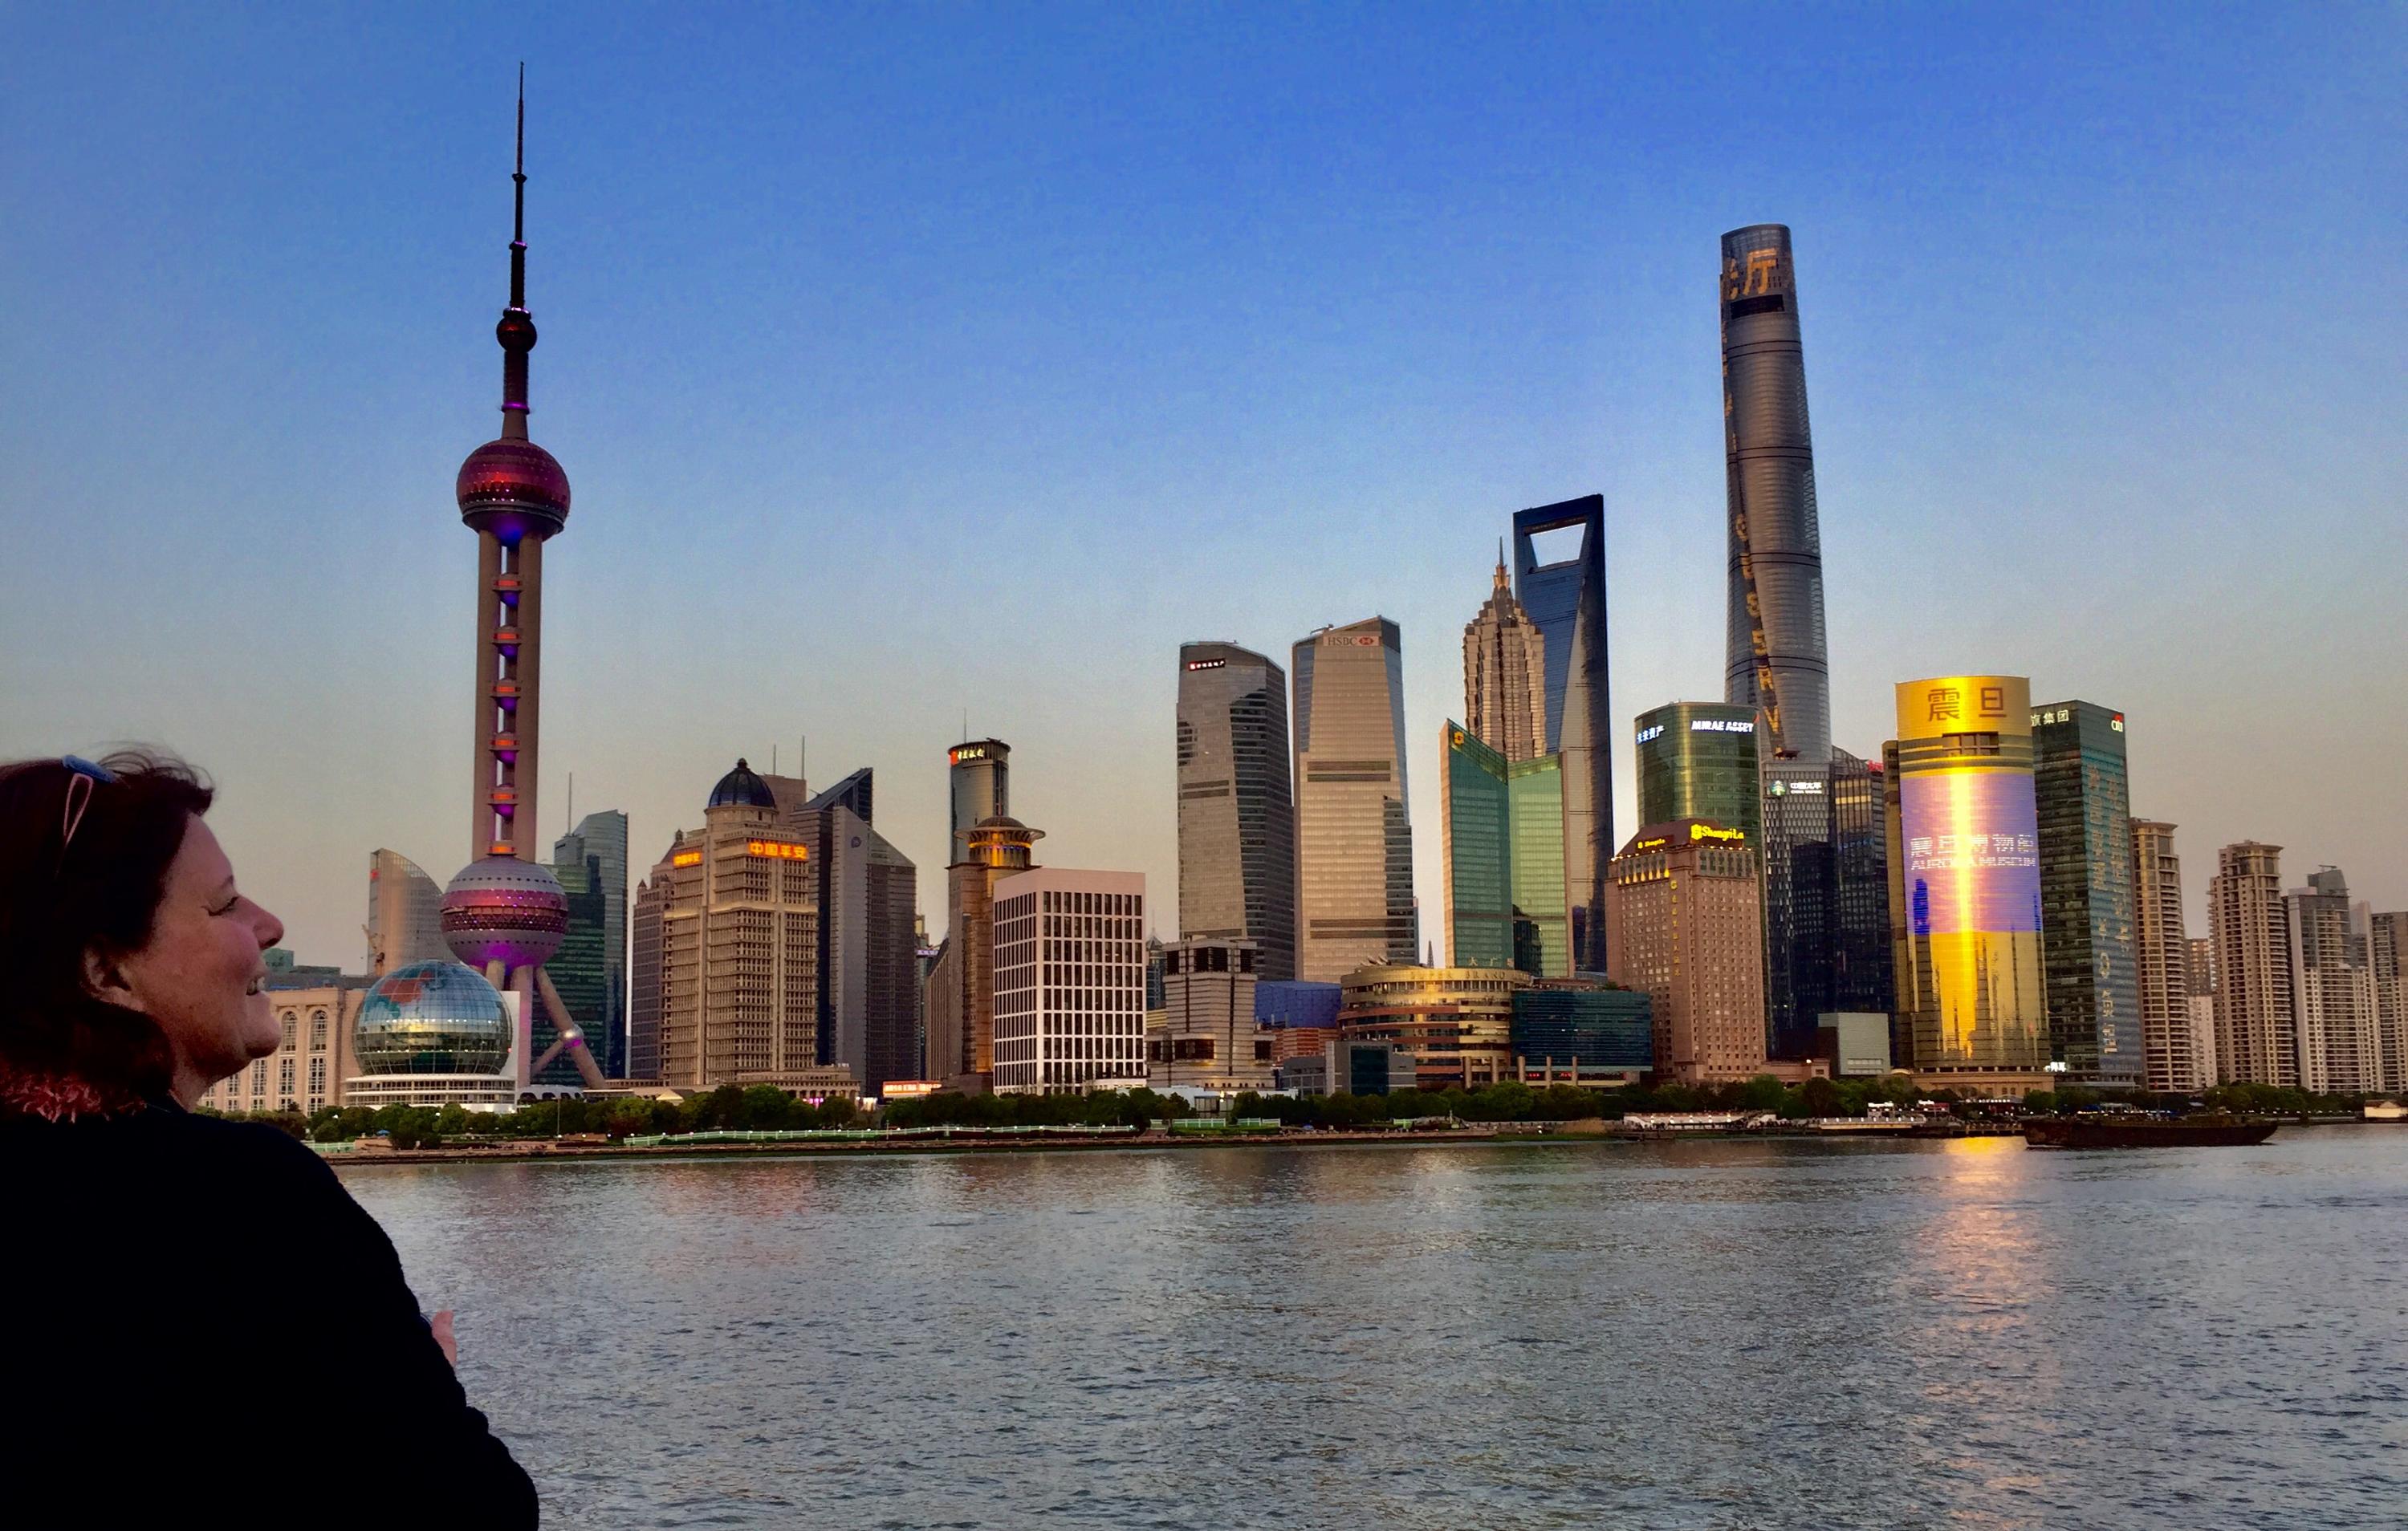 A picture of the Shanghai city skyline at dusk.